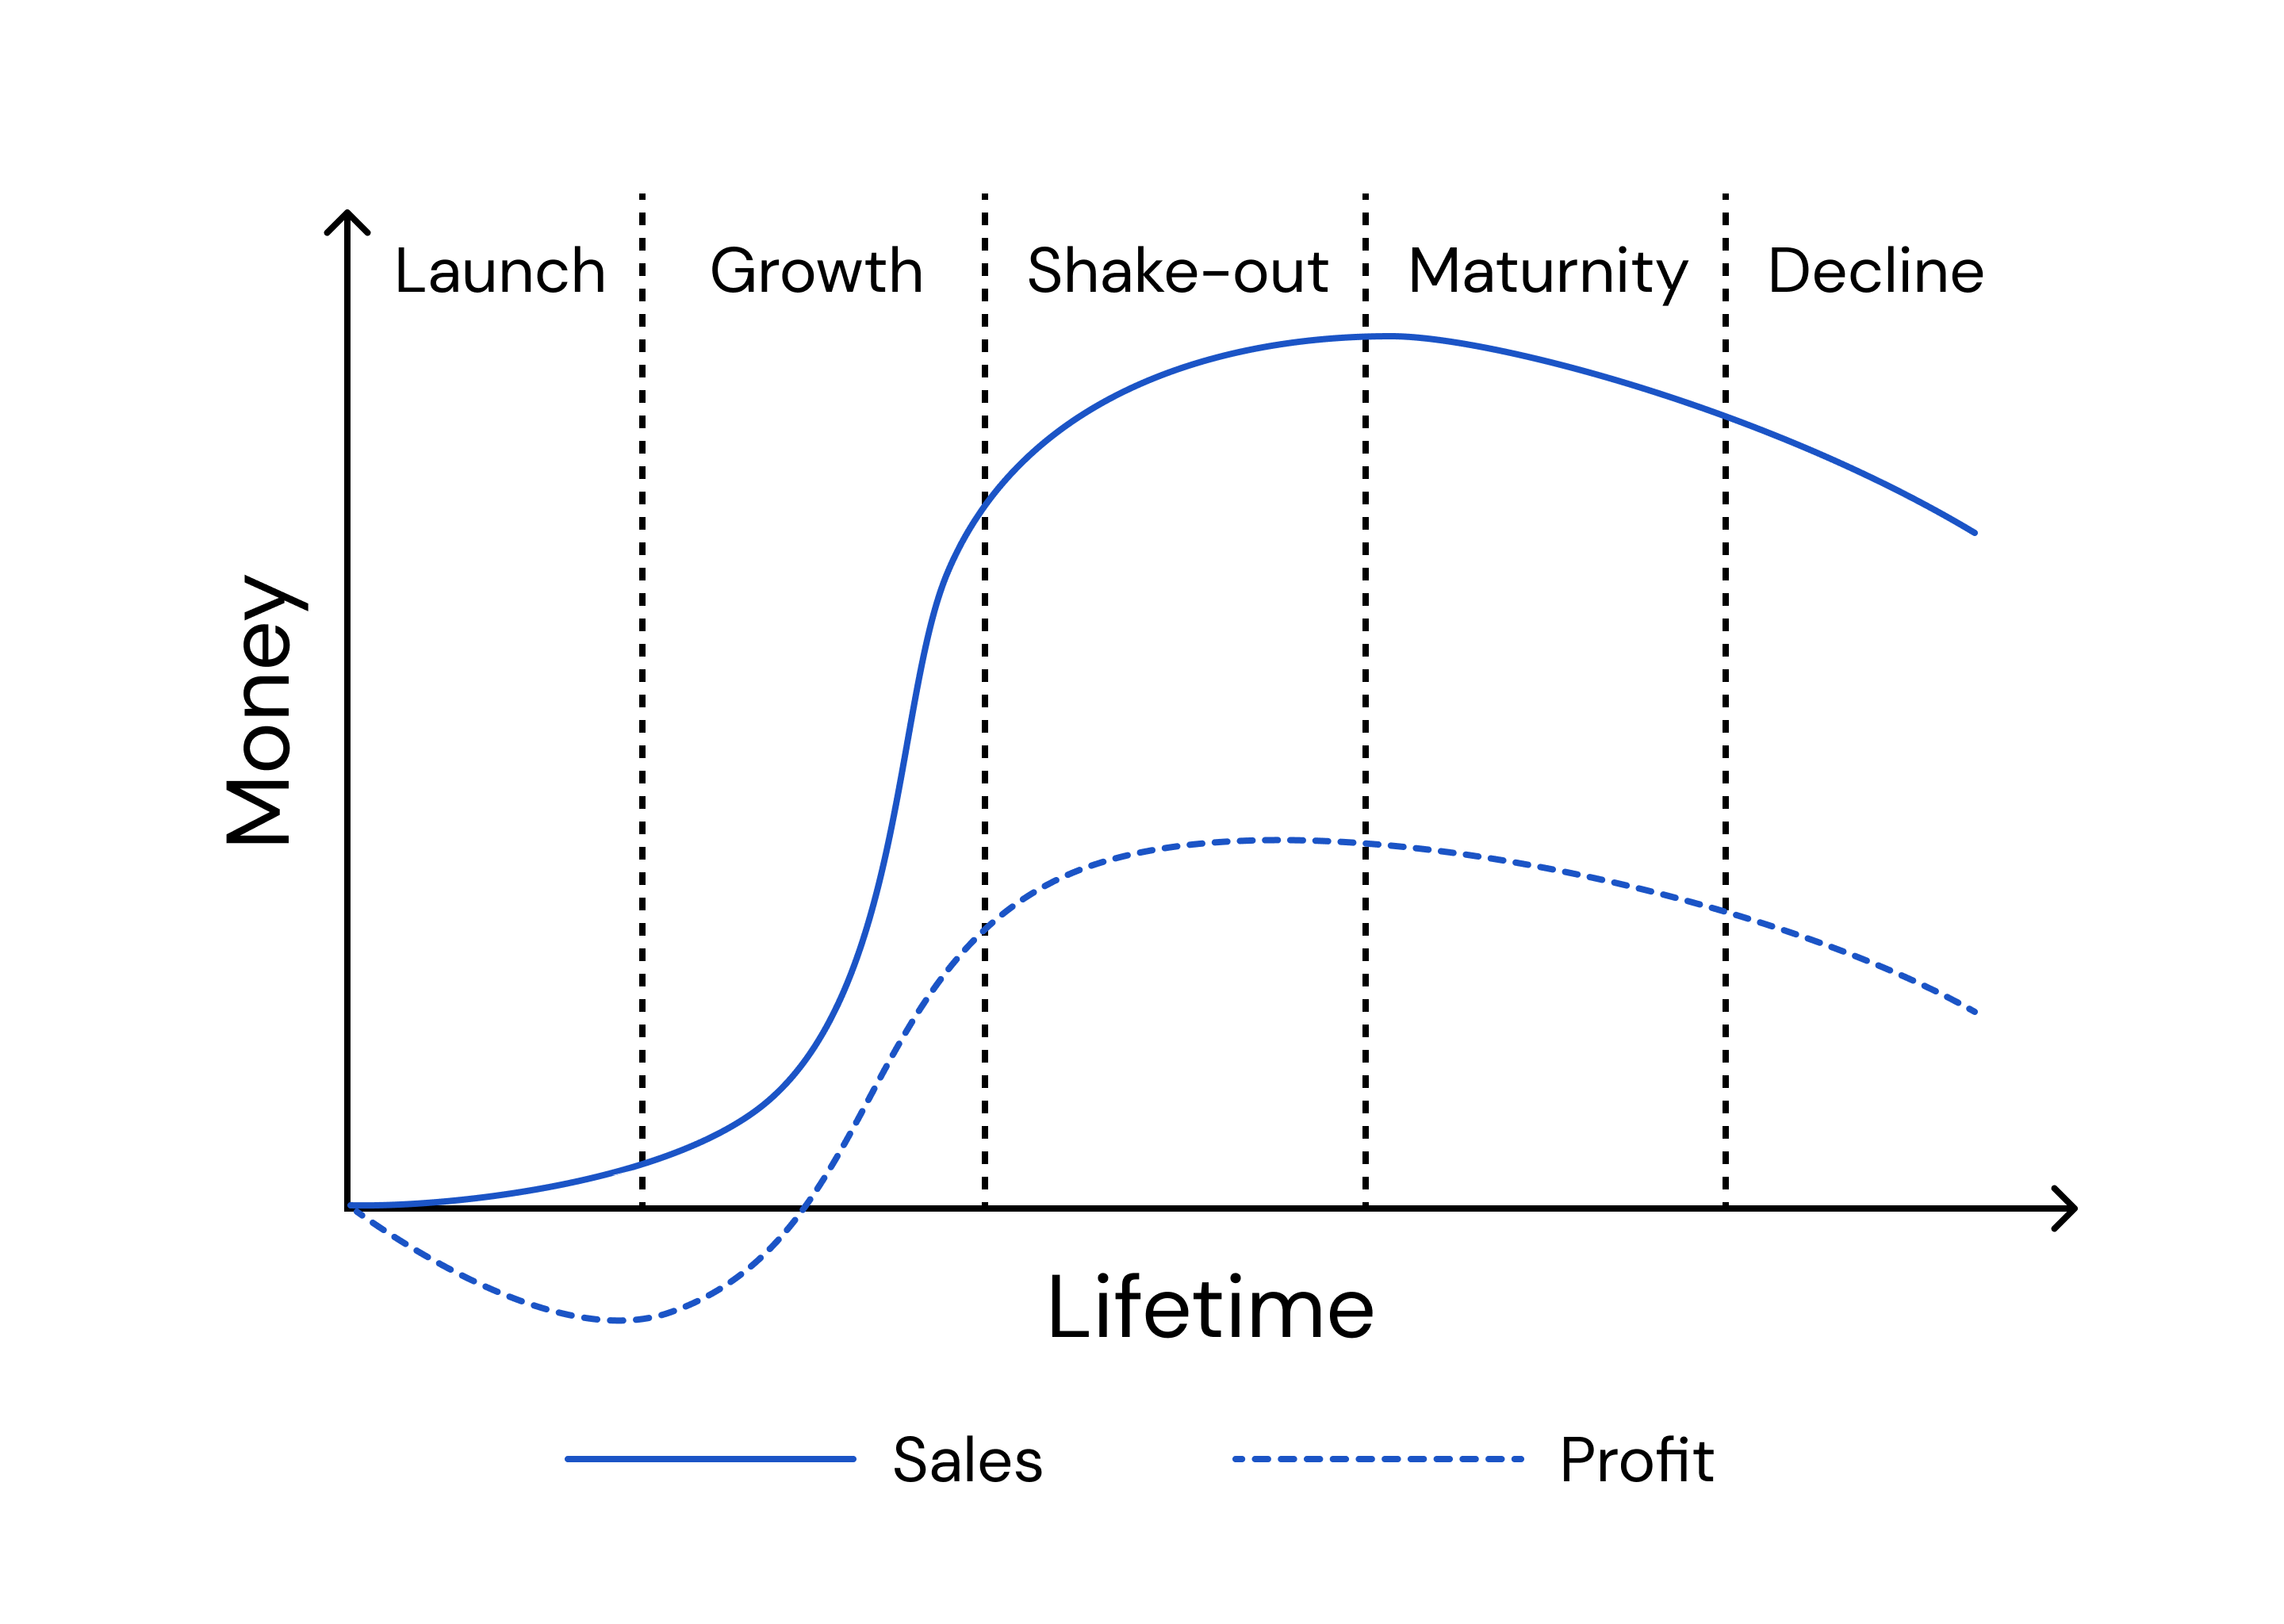 The business life cycle model